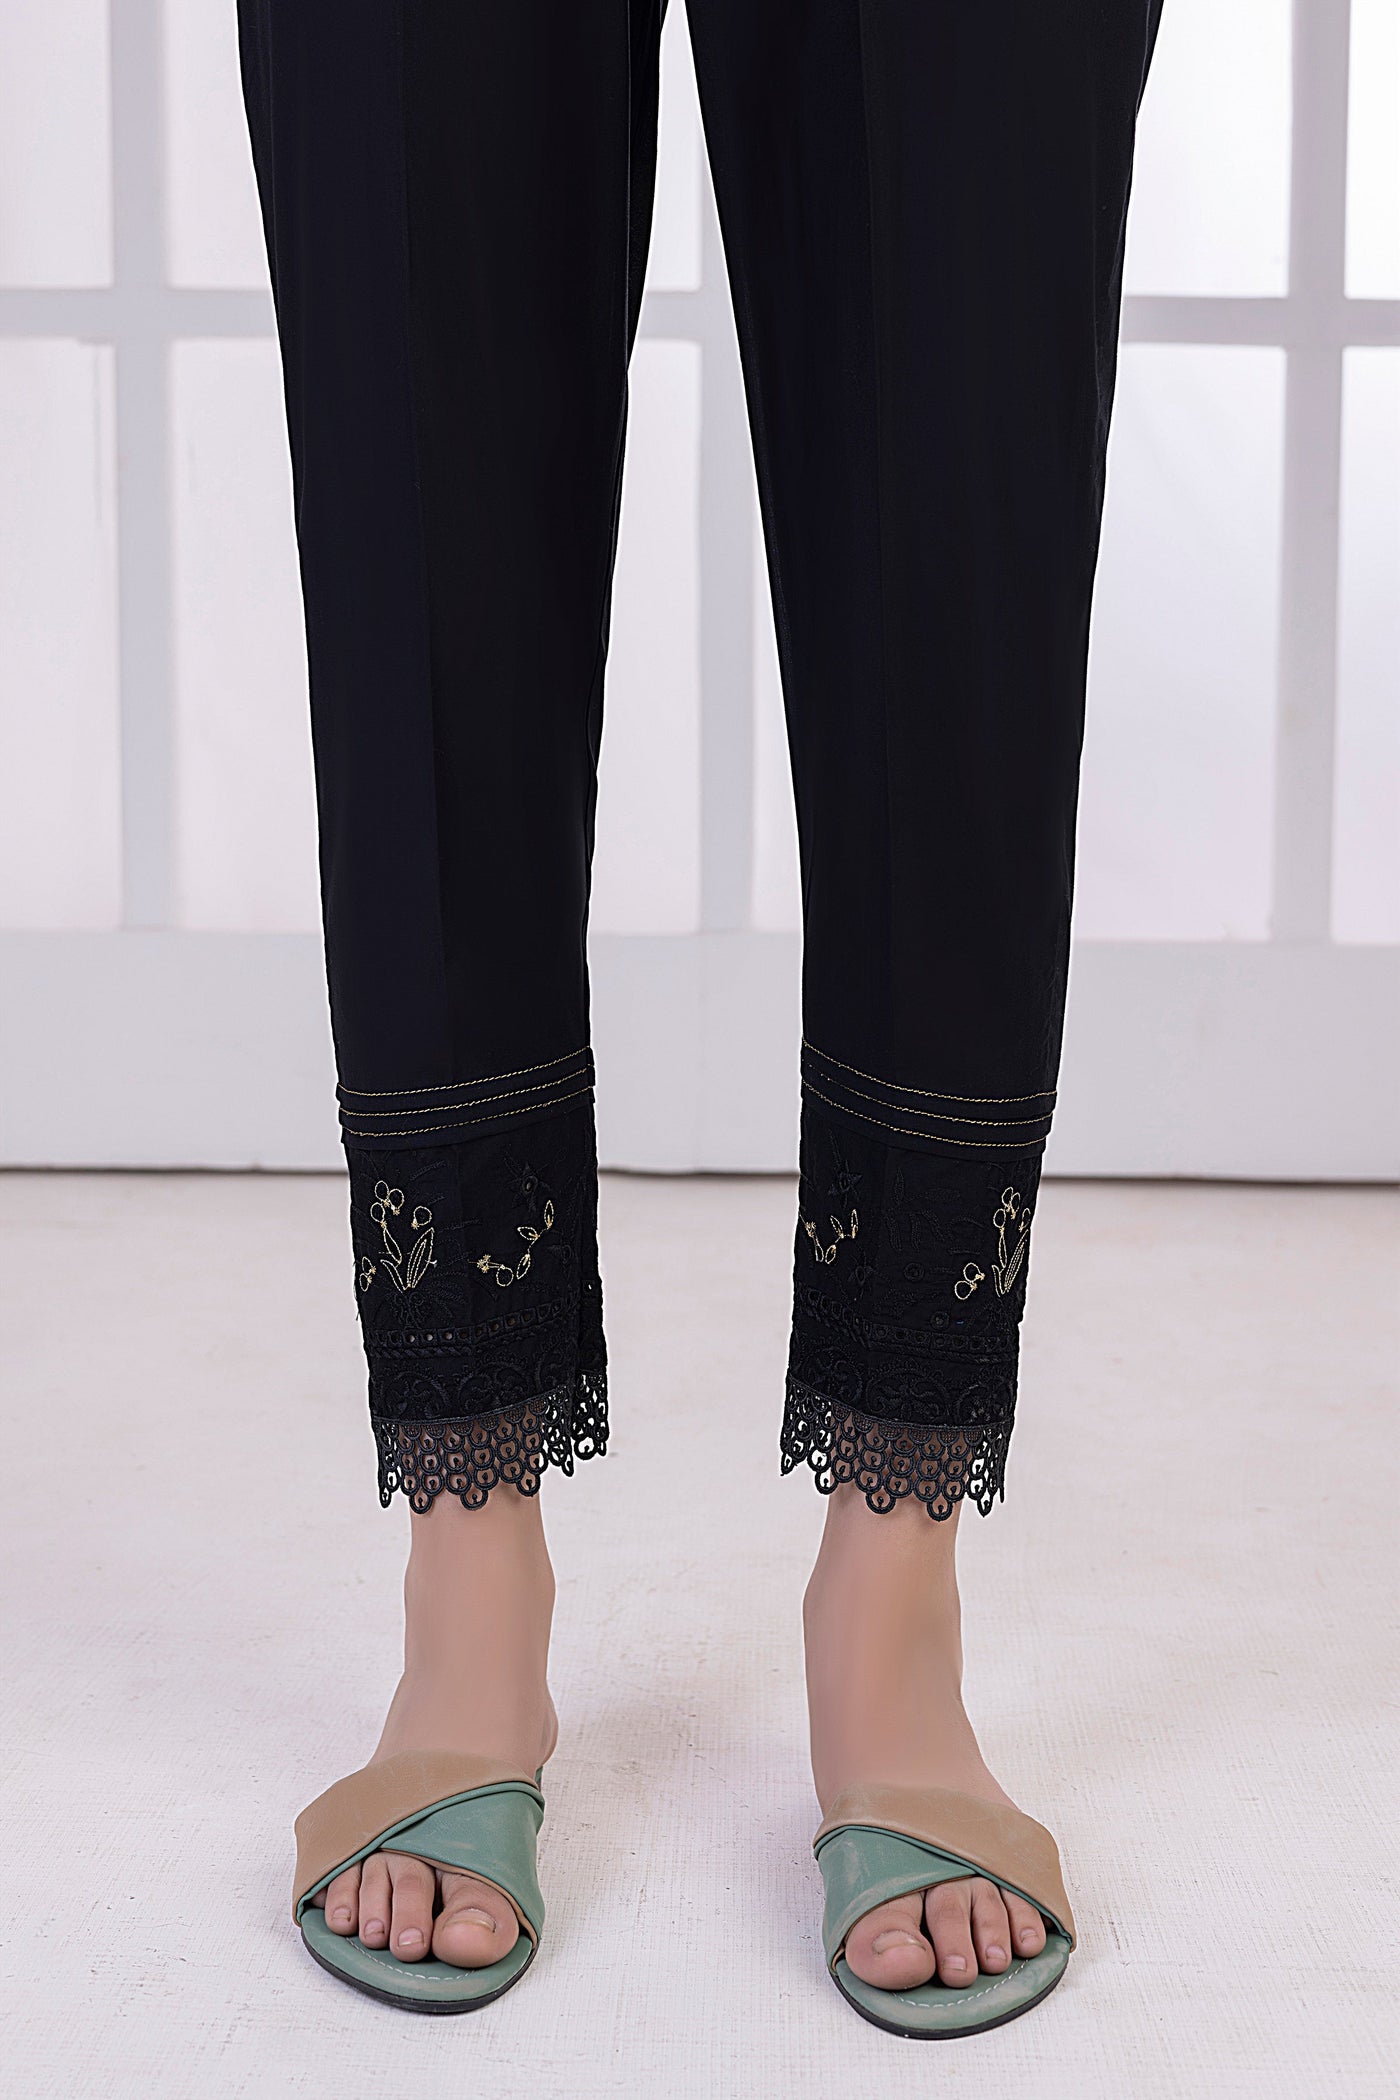 Lakhany 01 Piece Embroidered Trousers - LSM-T-3103 (B)